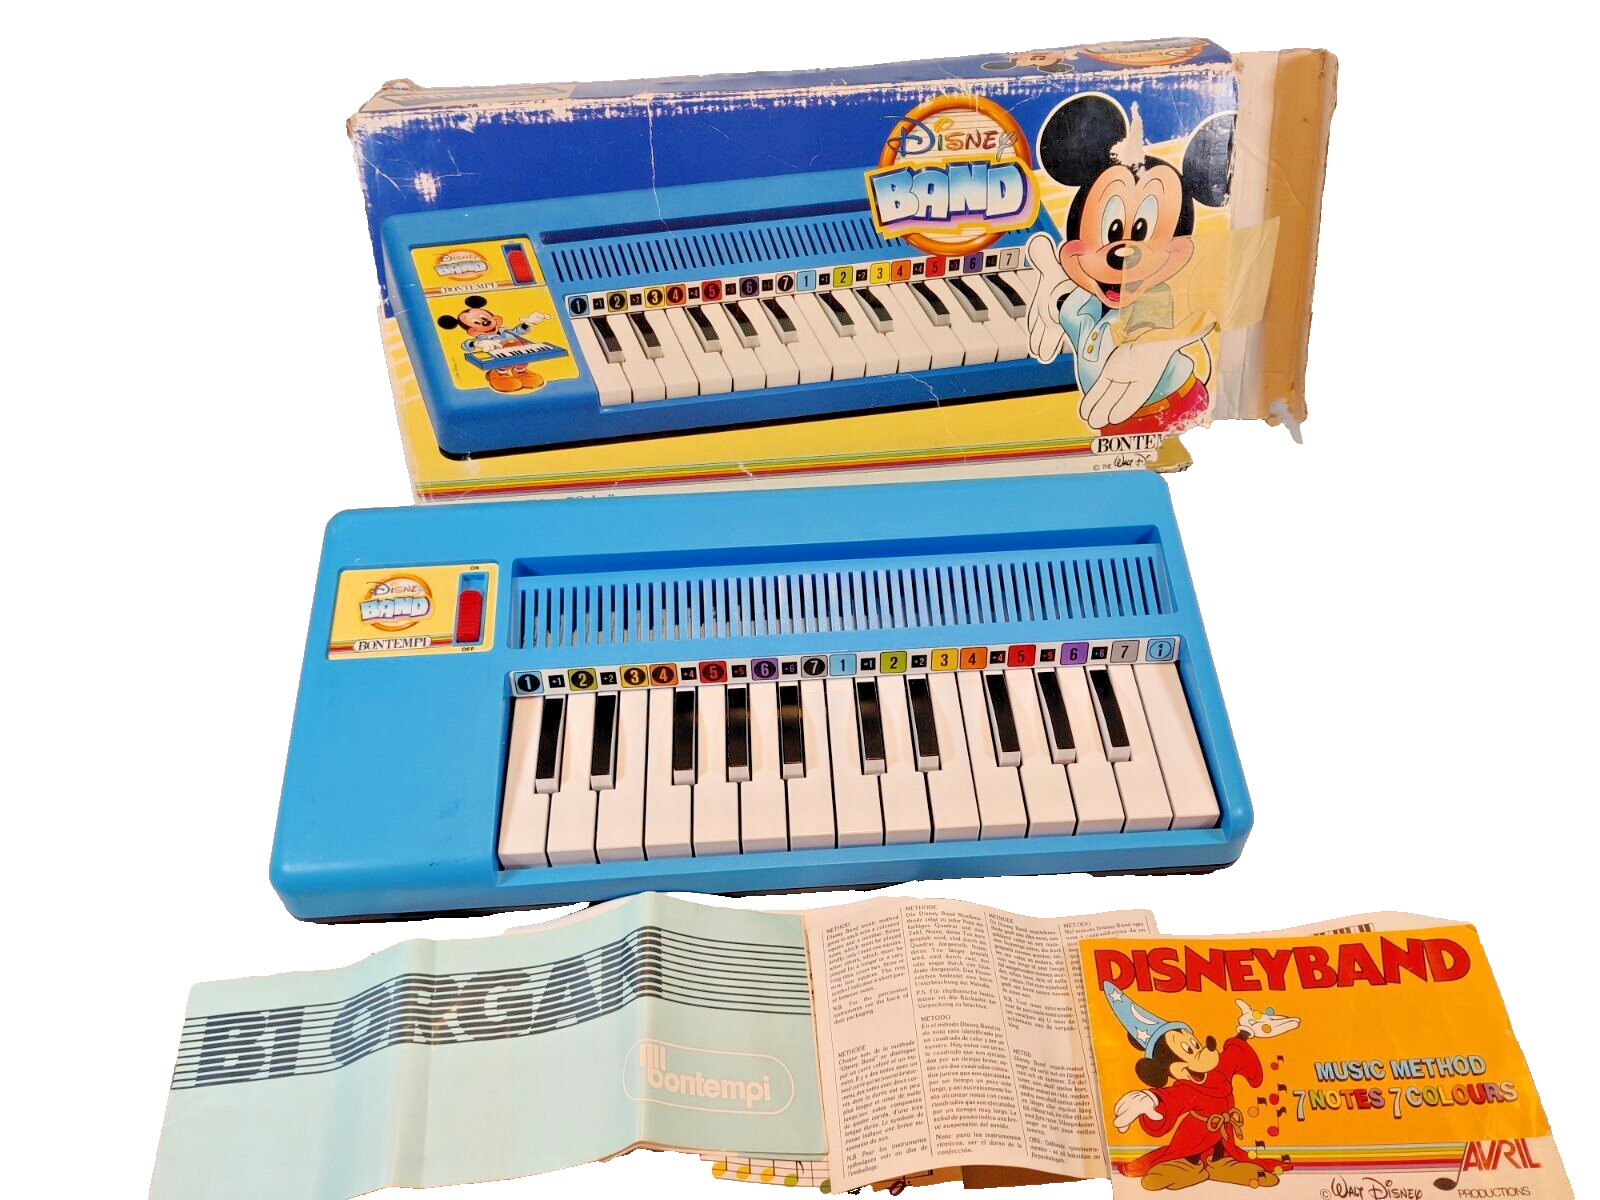 VINTAGE DISNEY BAND MICKEY MOUSE REED ORGAN 7 NOTE BONTEMPI MADE IN ITALY 80s - £32.55 GBP